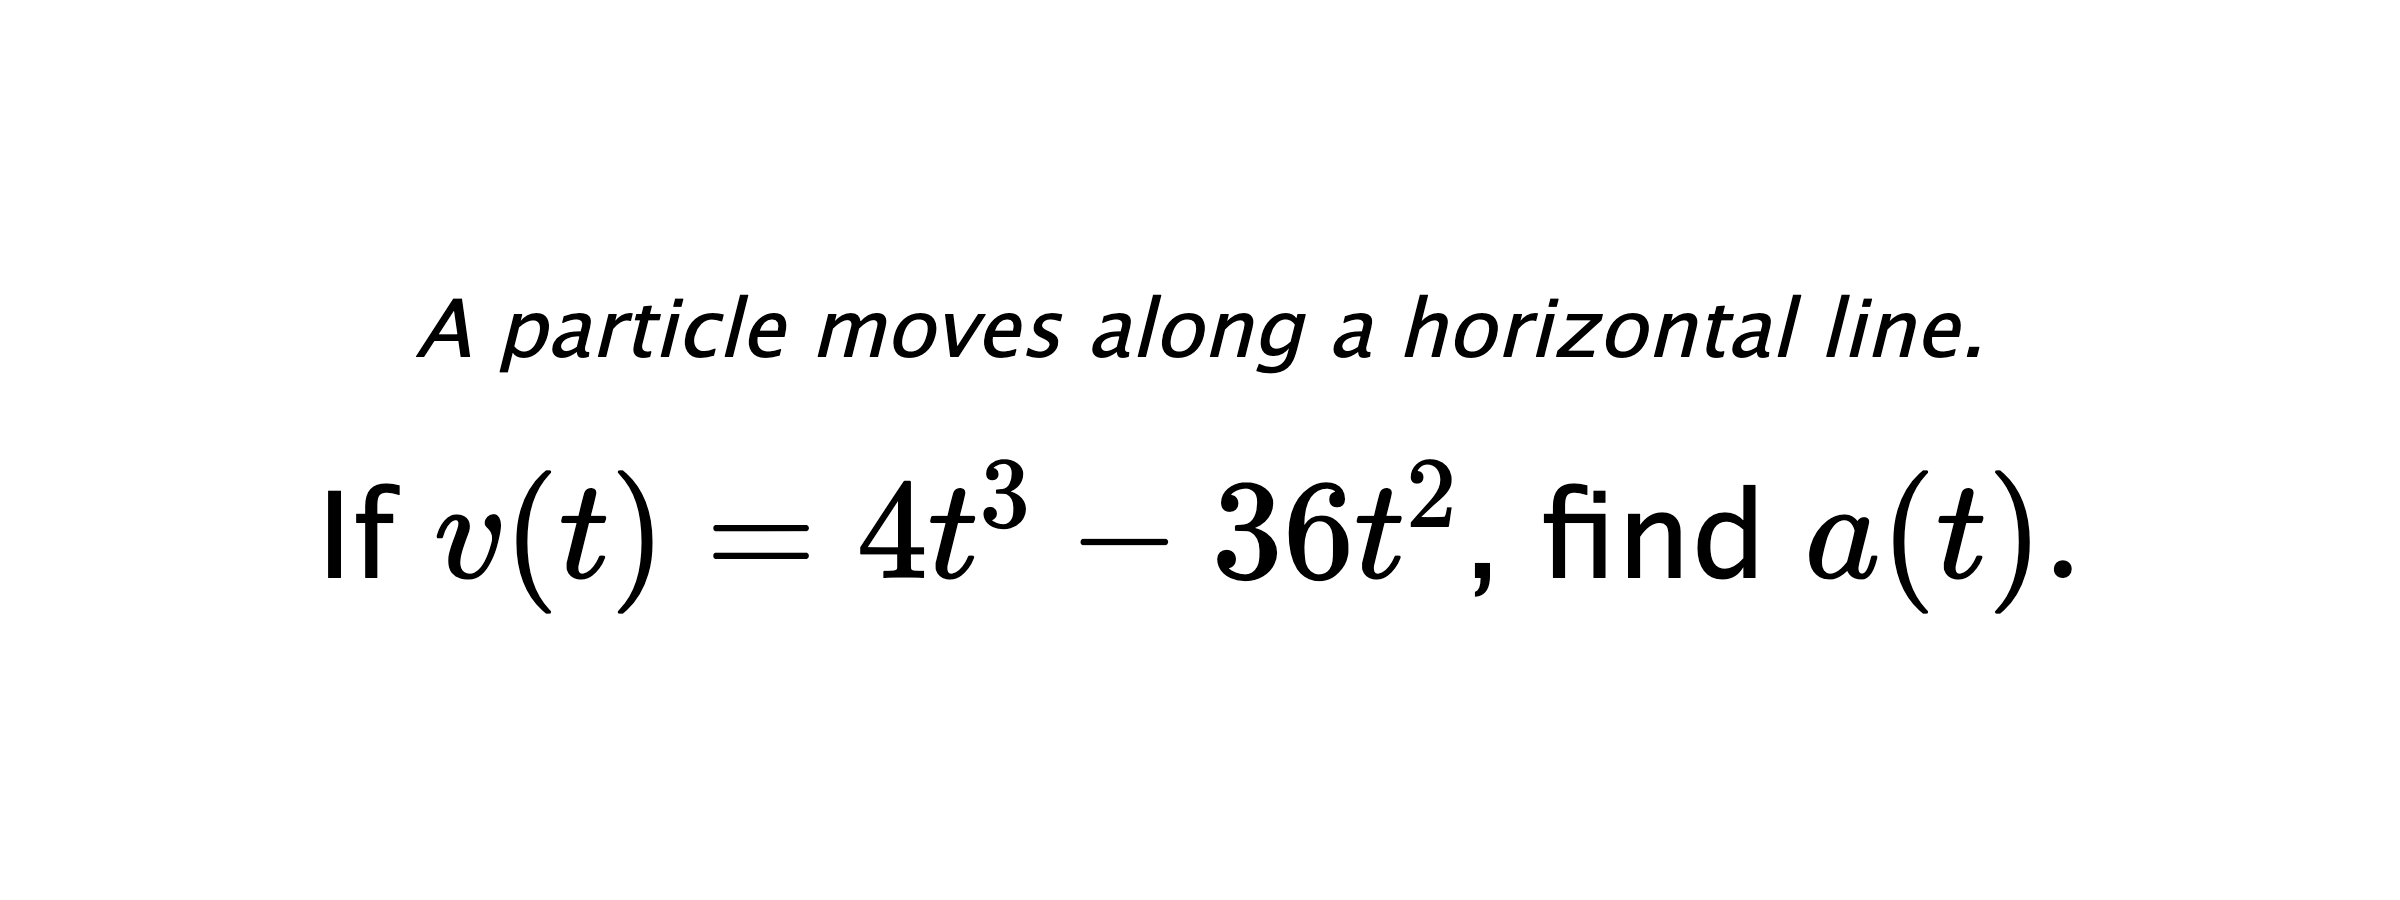 A particle moves along a horizontal line. If $ v(t)=4t^3-36t^2 $, find $ a(t) .$